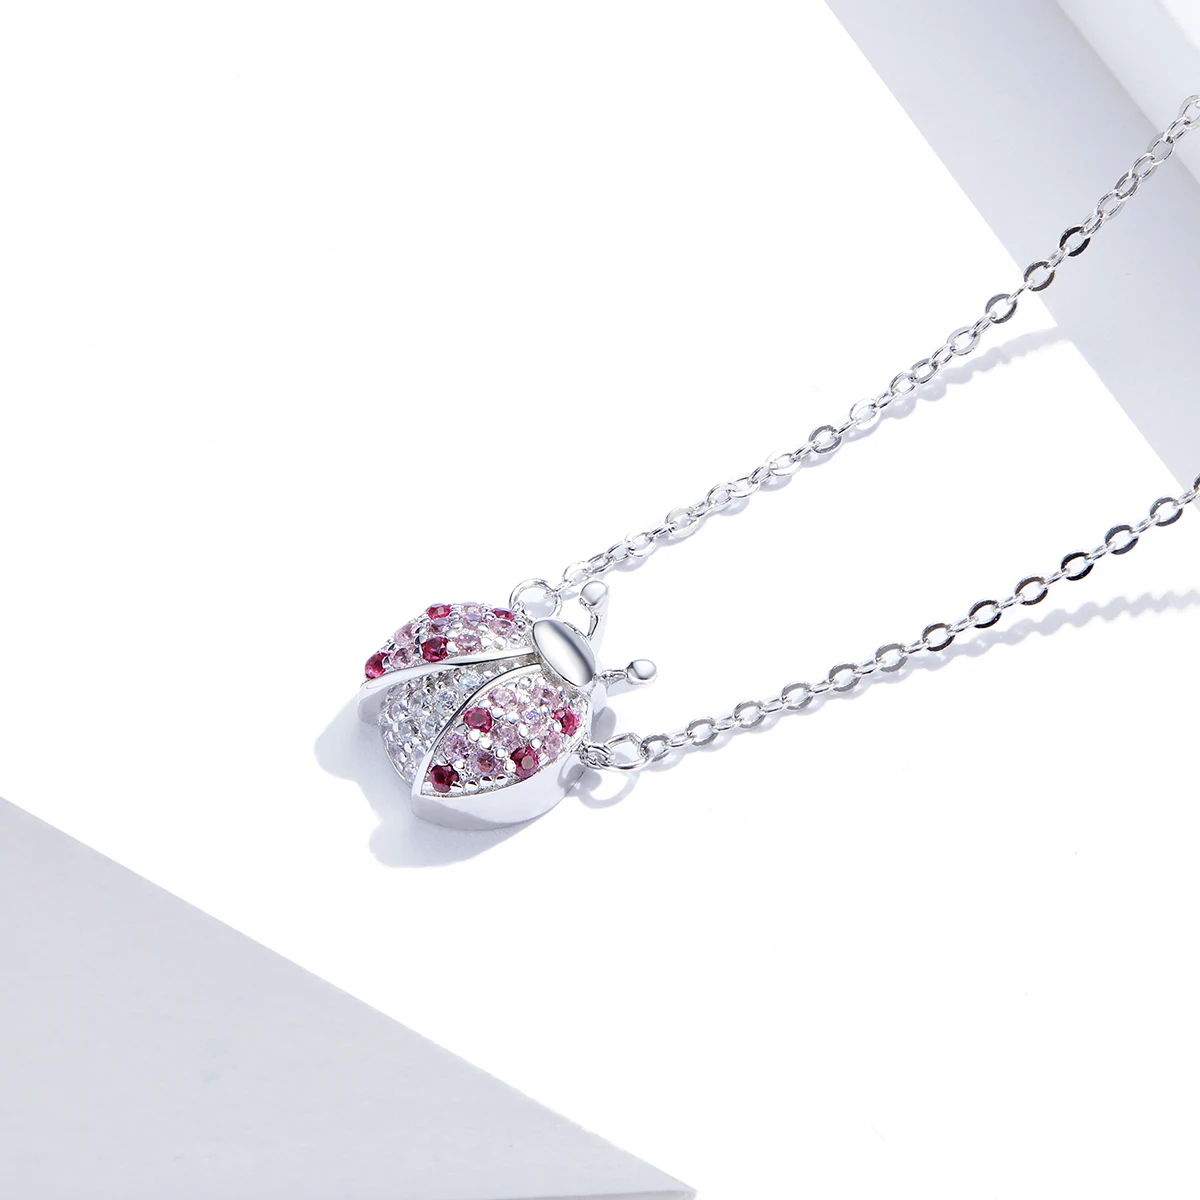 

New Style Pink Cz Ladybug Insect Pendant 925 Sterling Silver Choker Necklace